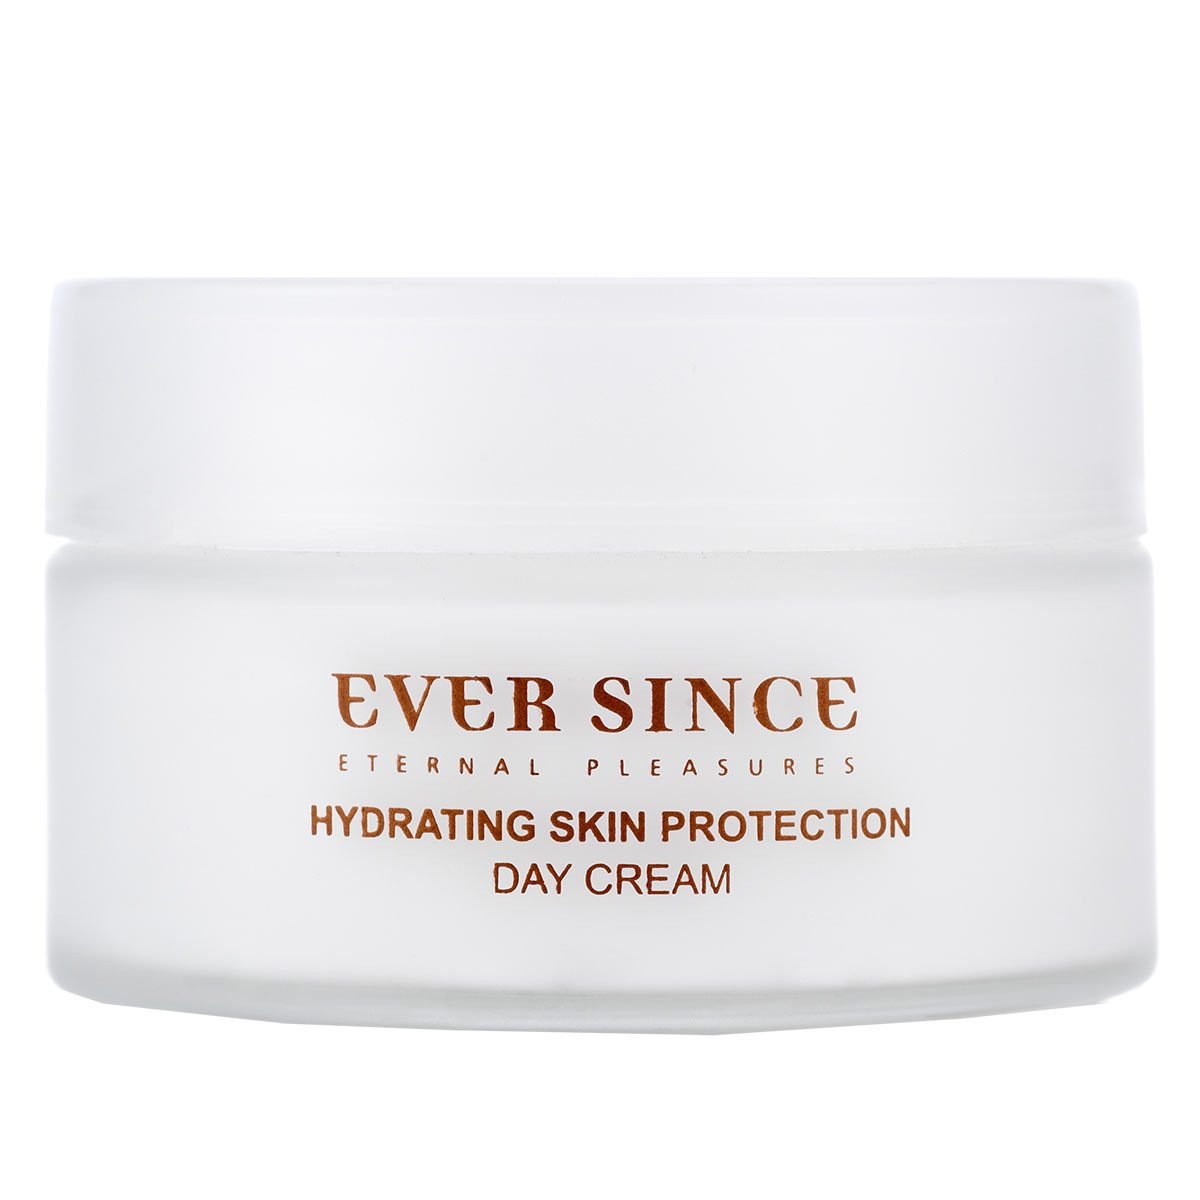 Ever Since Hydrating Skin Protection Day Cream, 50ml - Signature Retail Stores